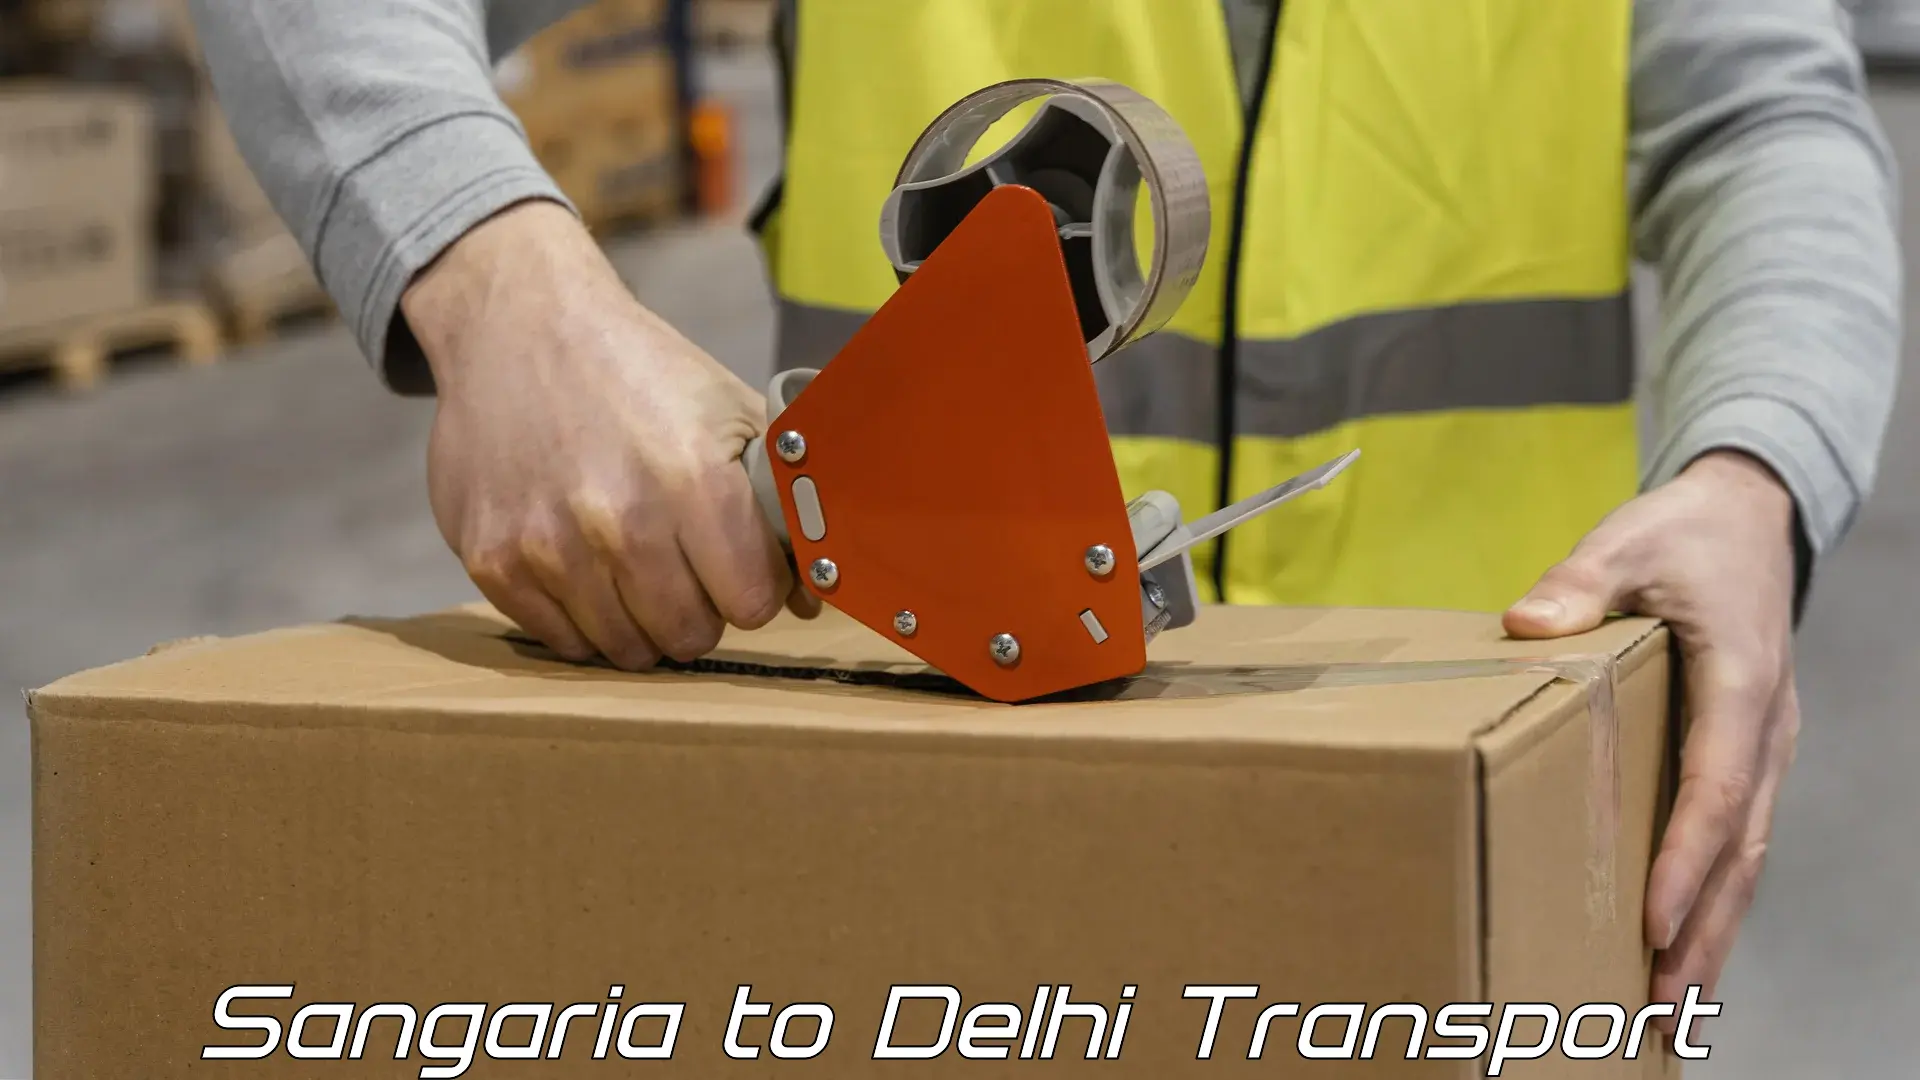 Road transport online services Sangaria to NCR